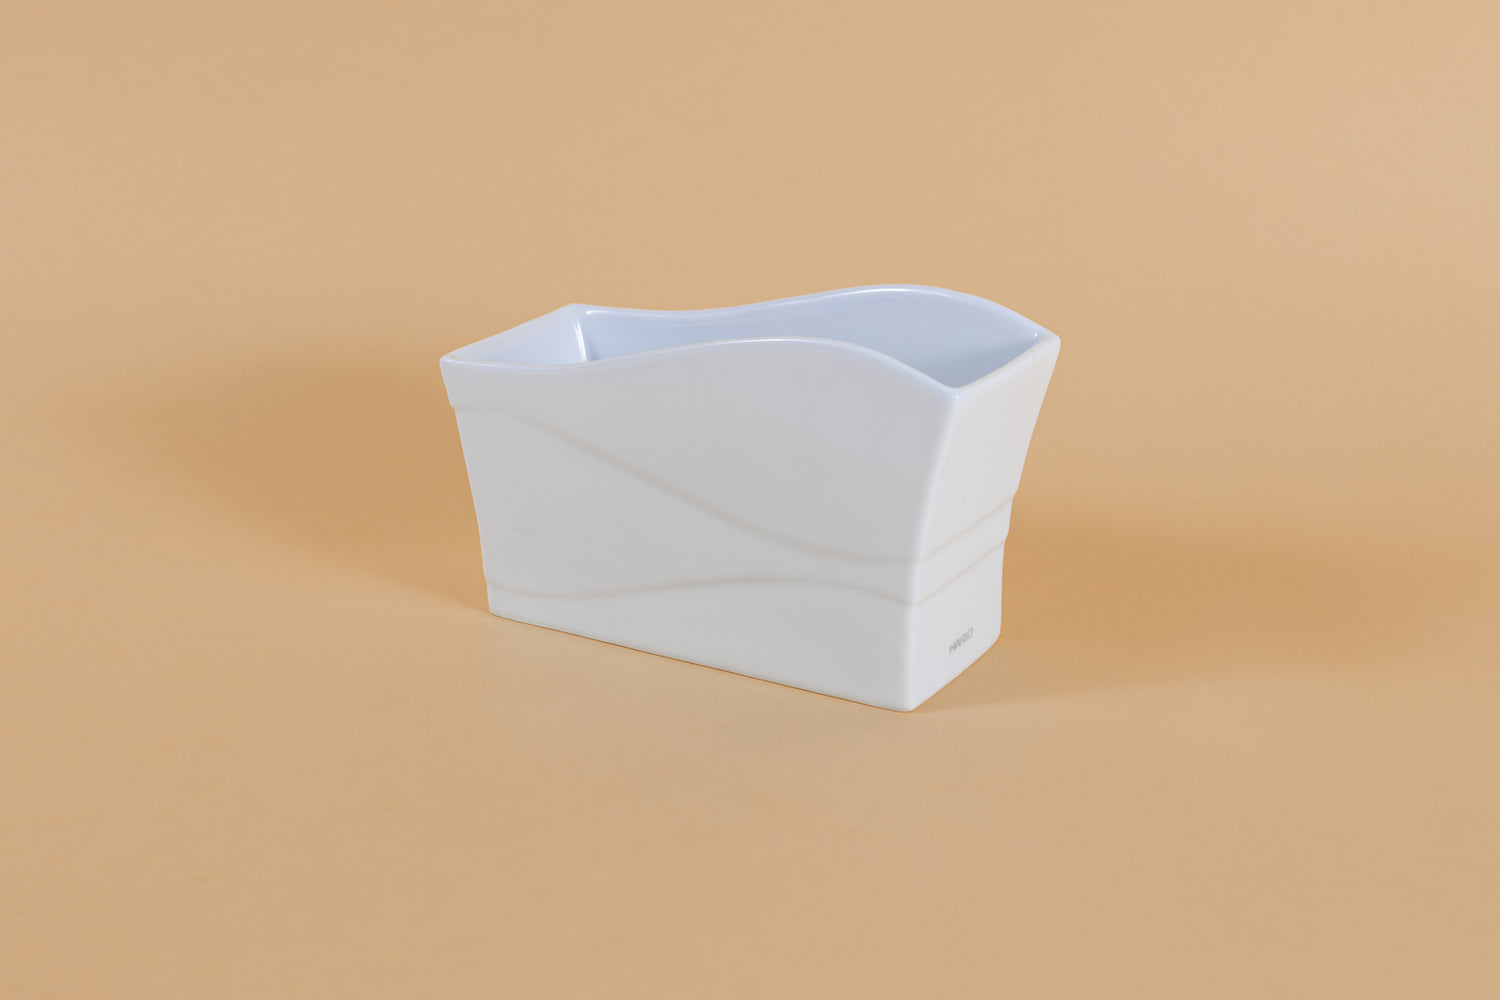 Rectangular all white ceramic vessel with &quot;wave&quot; design along side and top on orange backdrop.